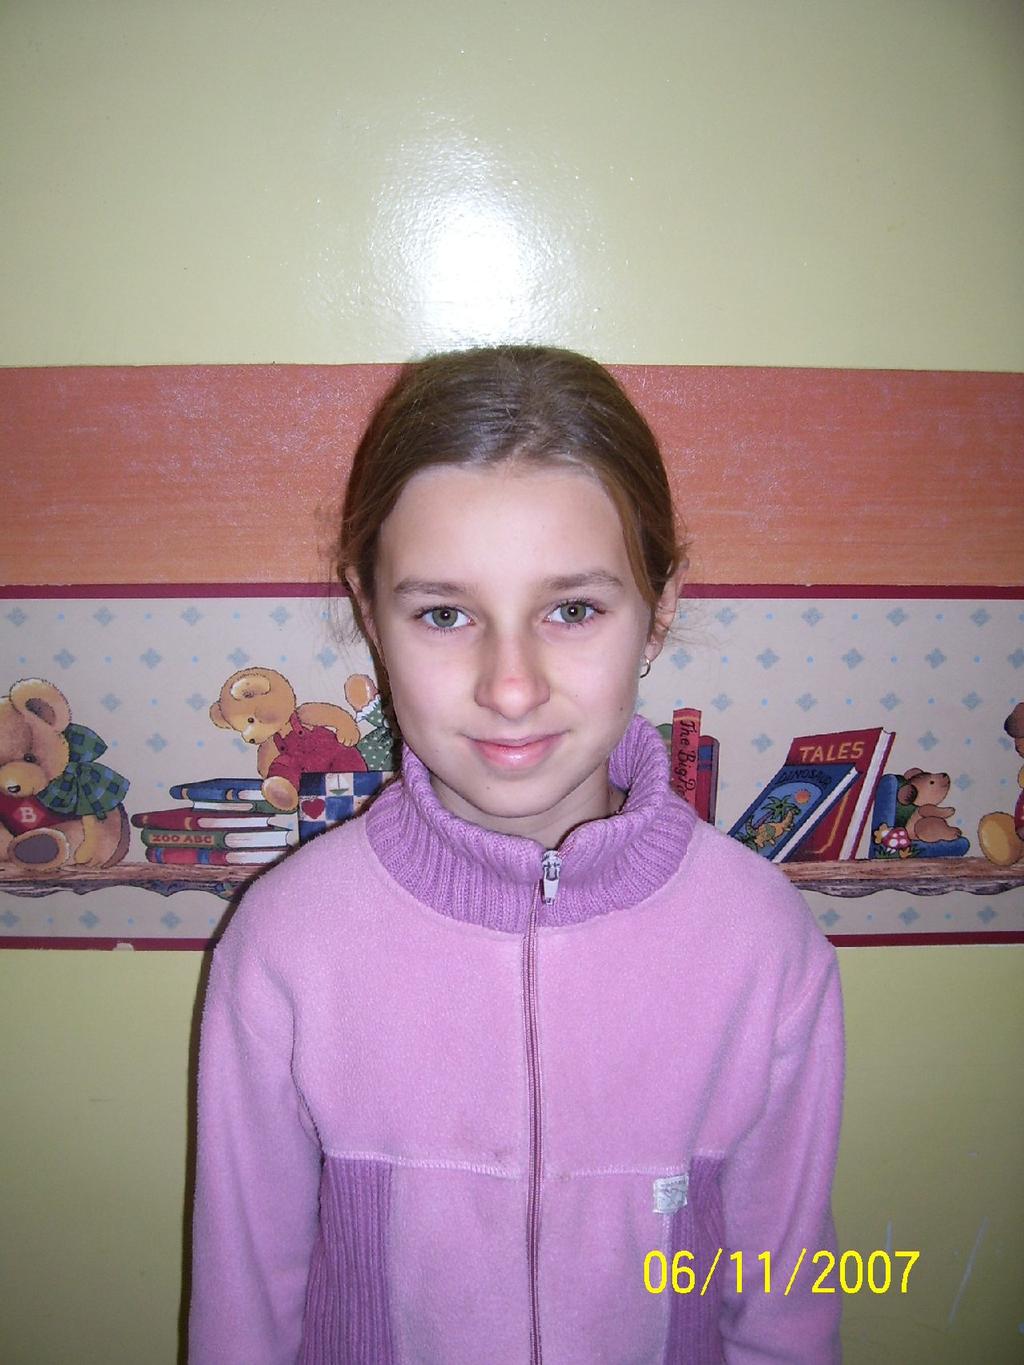 Hi! I'm Adriana Liszka I'm11 years old I am in class 5a. I have got a brother. His name is Maciek, he is 4. My favourite animals are horses and cats.